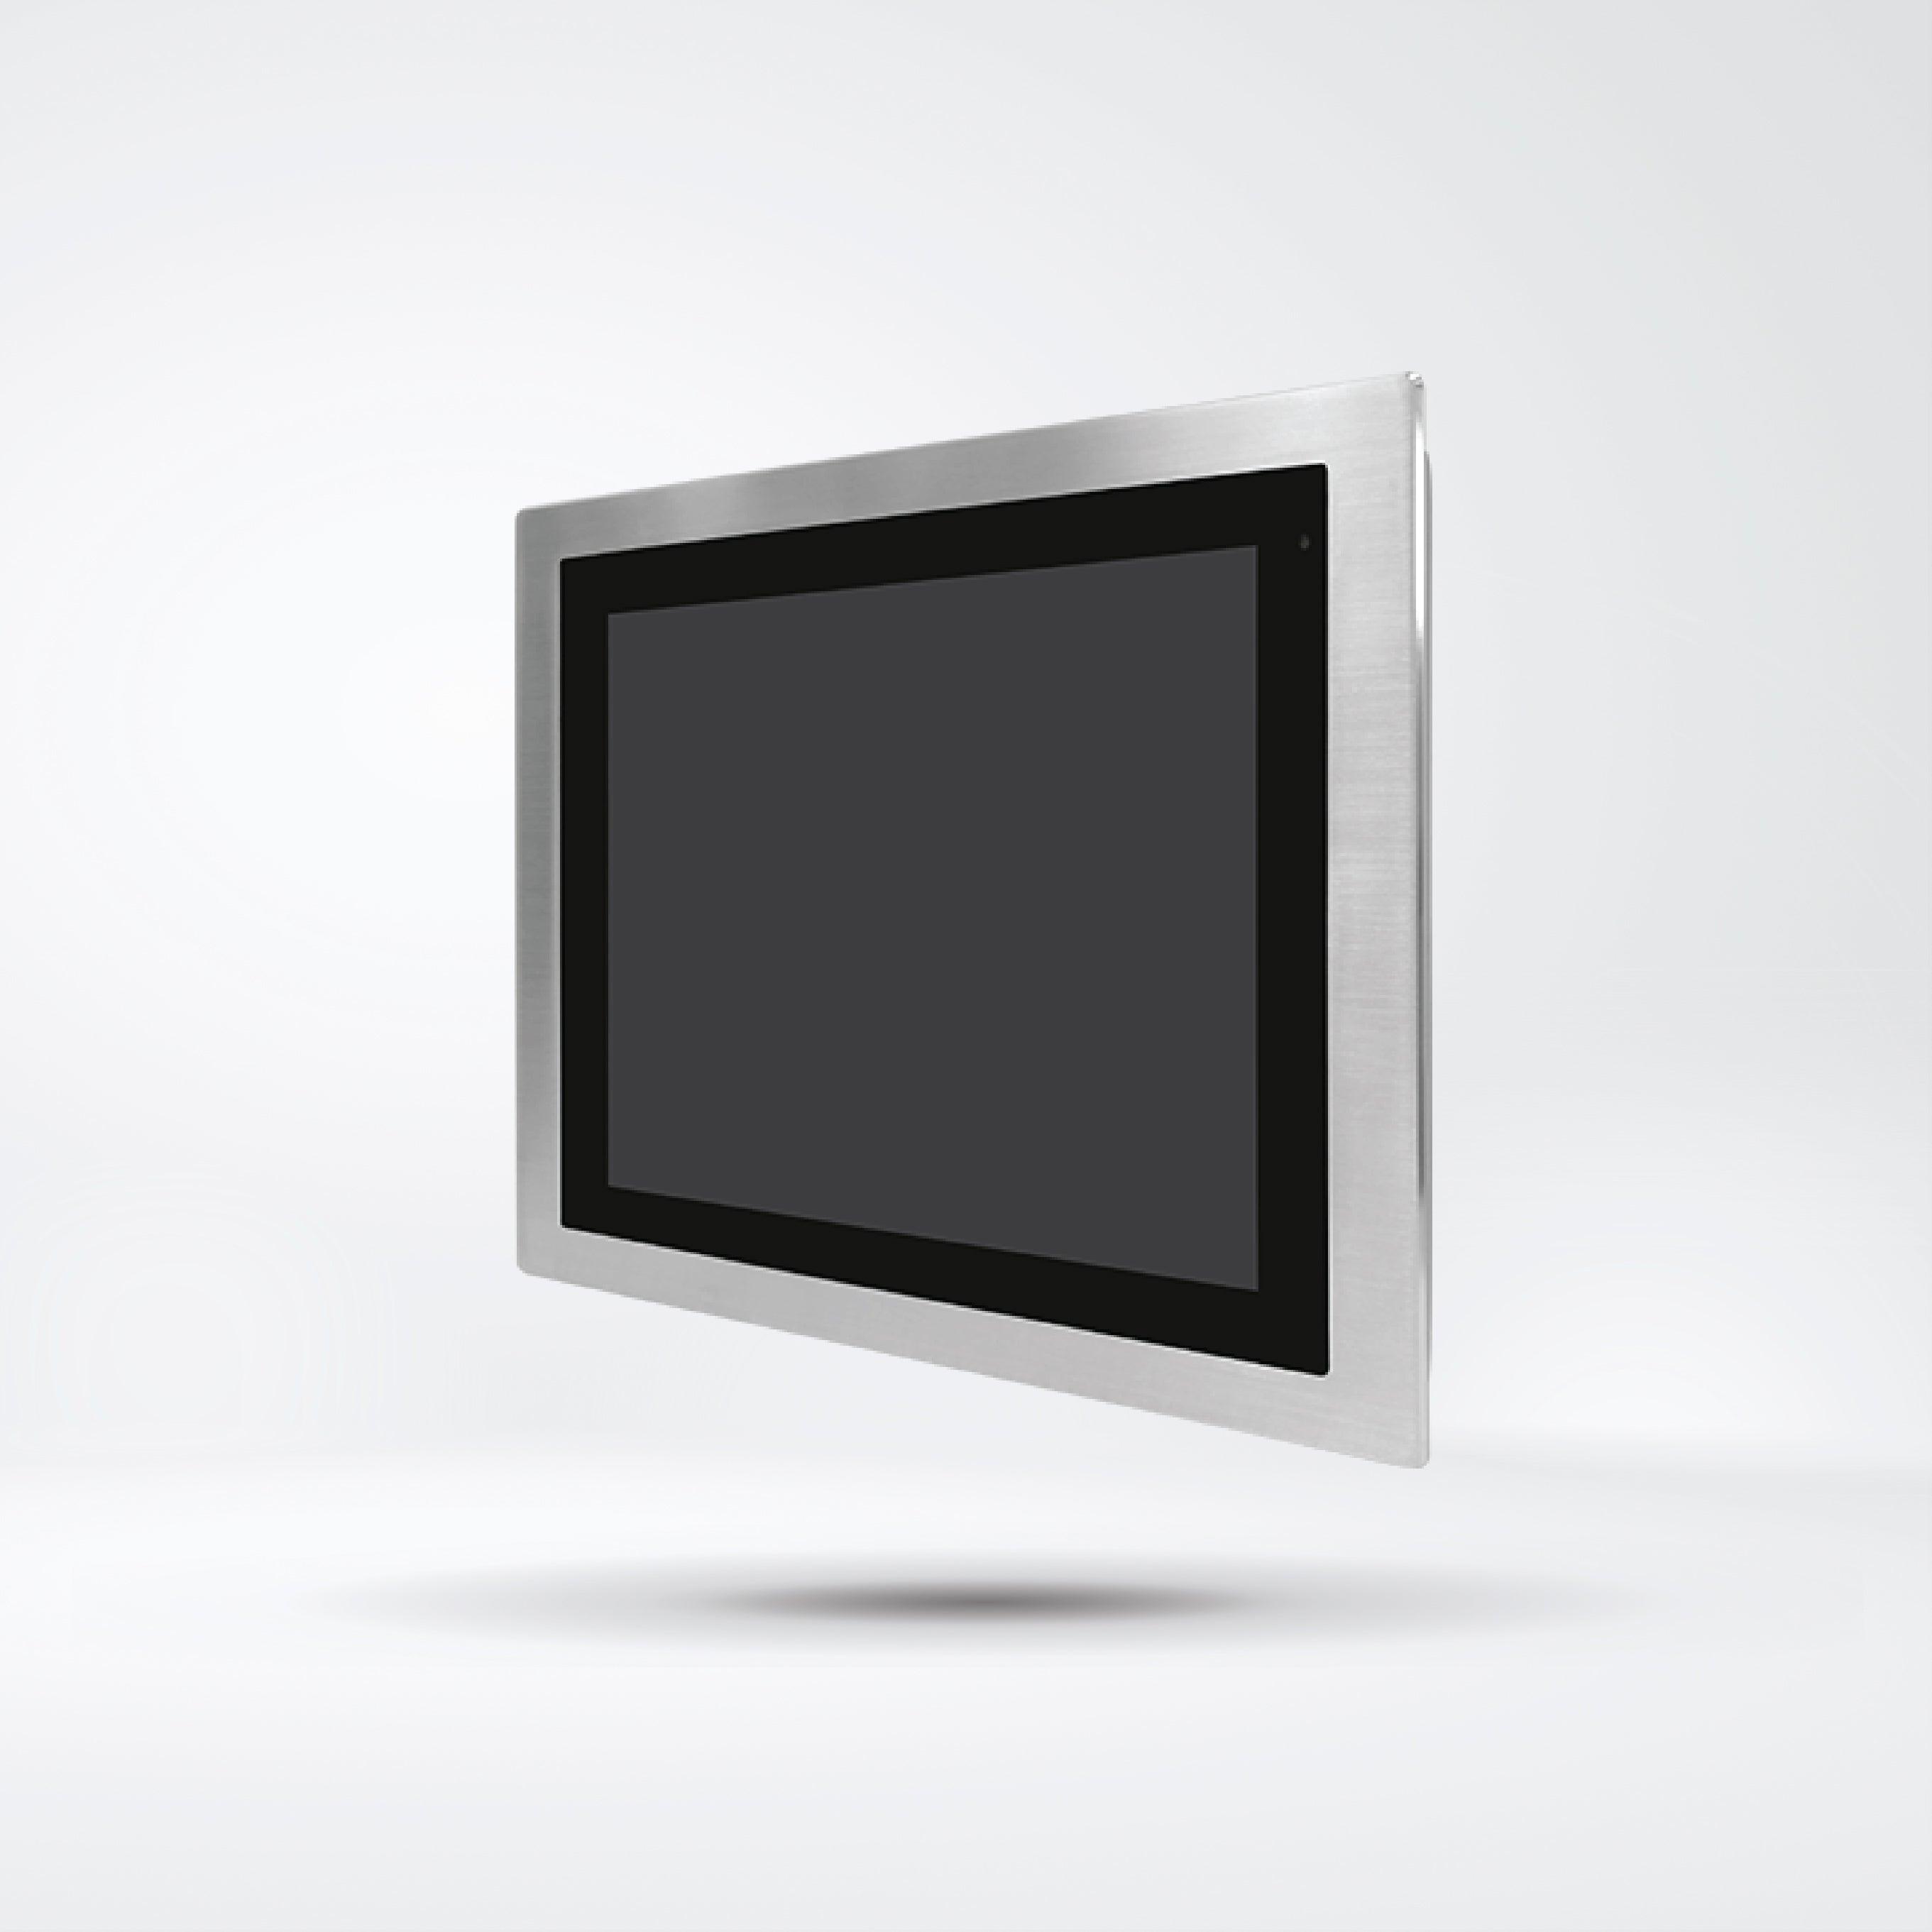 FABS-115R 15” Flat Front Panel IP66 Stainless Chassis Display - Riverplus